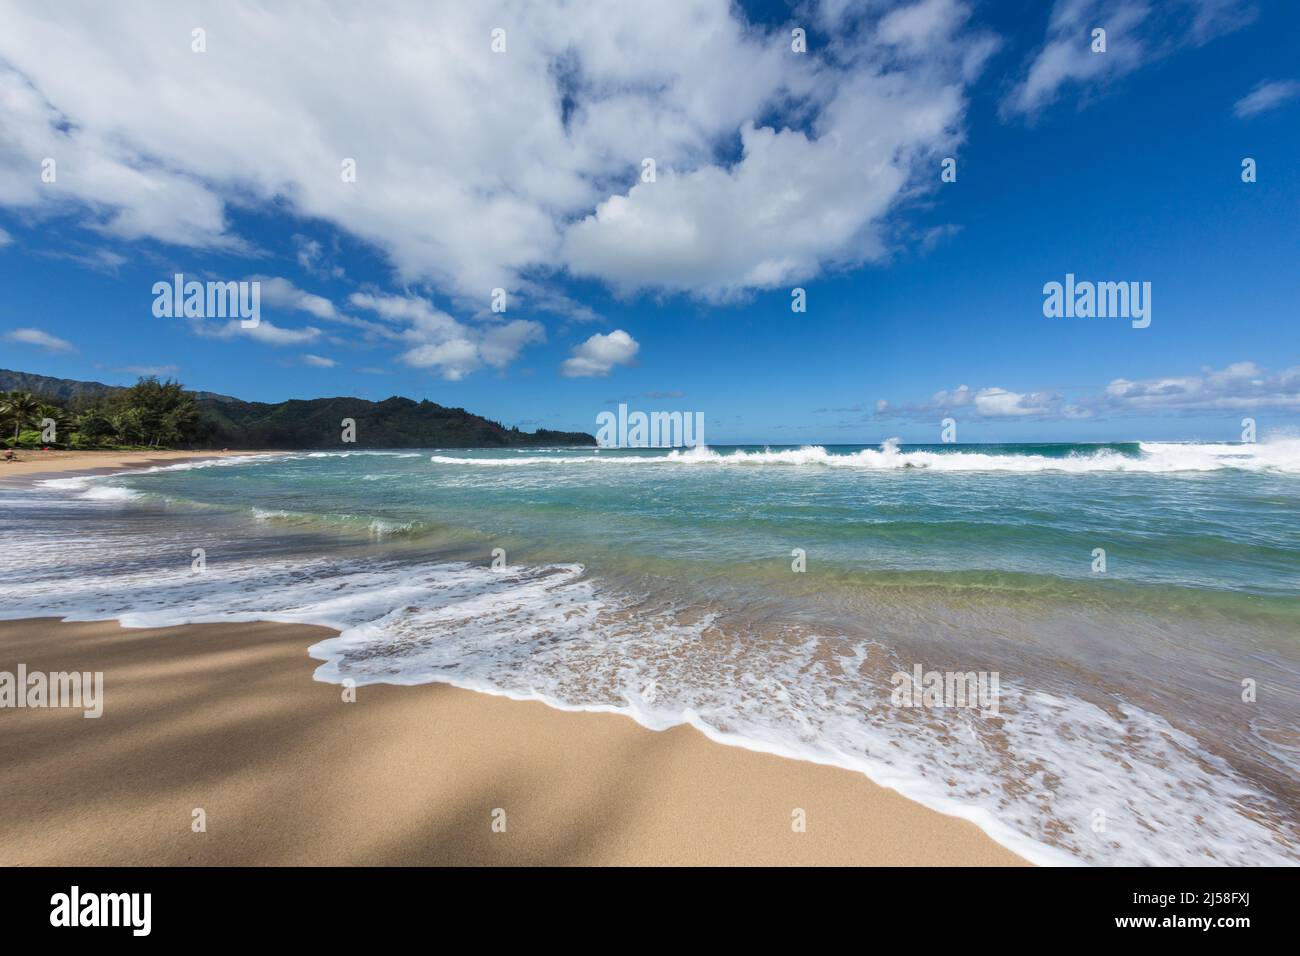 Waves and surf on Hanalei Beach on the Island of Kauai, Hawaii, United States.  Photographed with a fisheye lens which creates a distorted image. Stock Photo